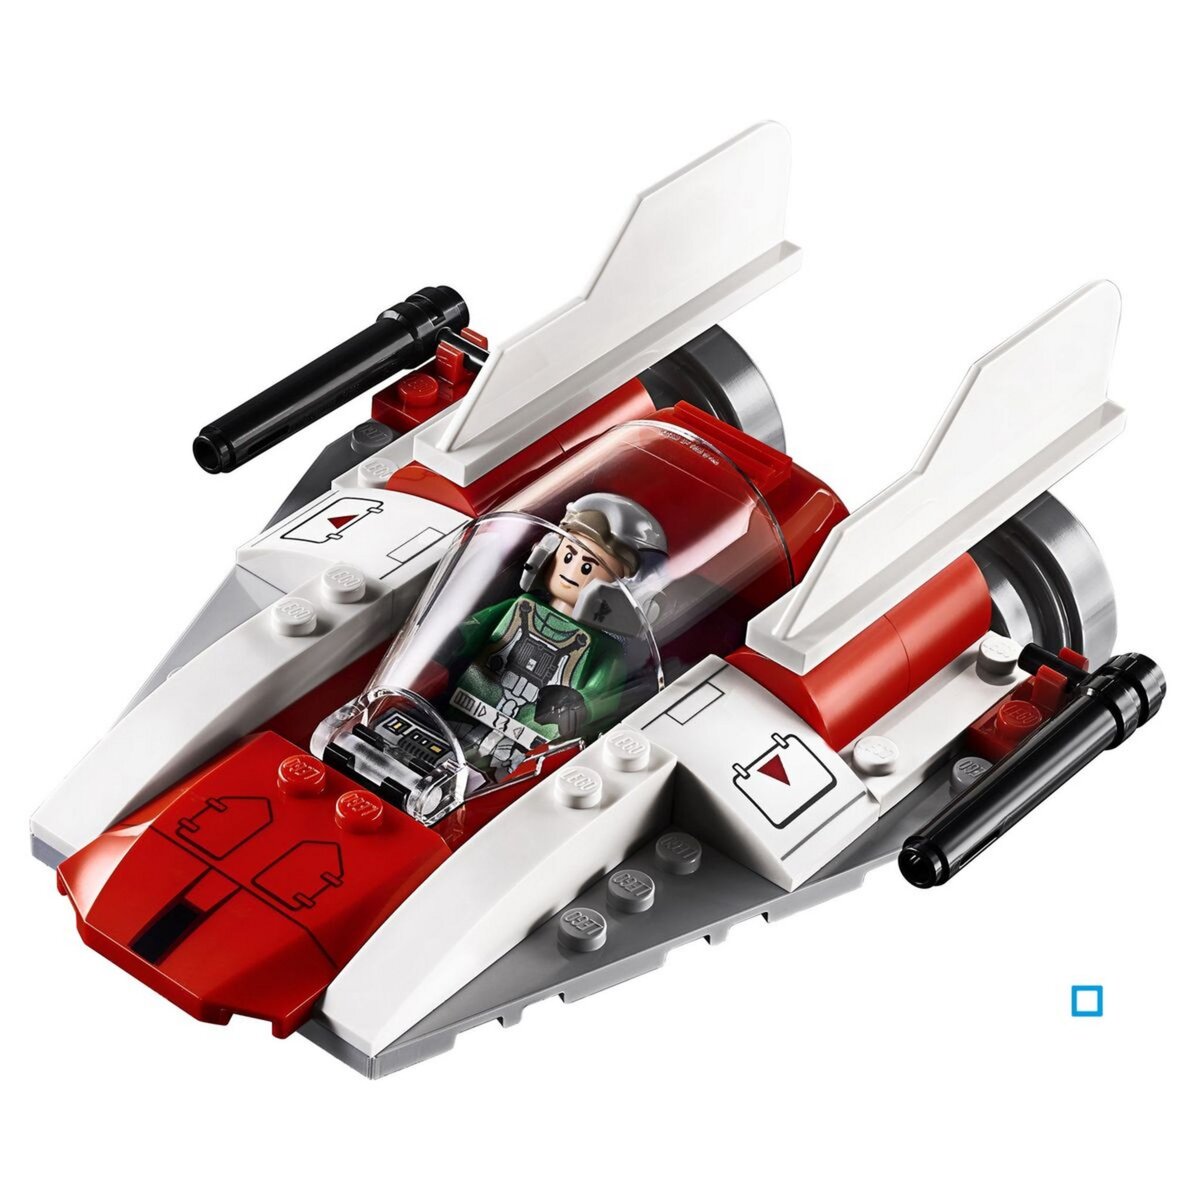 LEGO Star Wars 75247 - Chasseur stellaire rebelle A-Wing